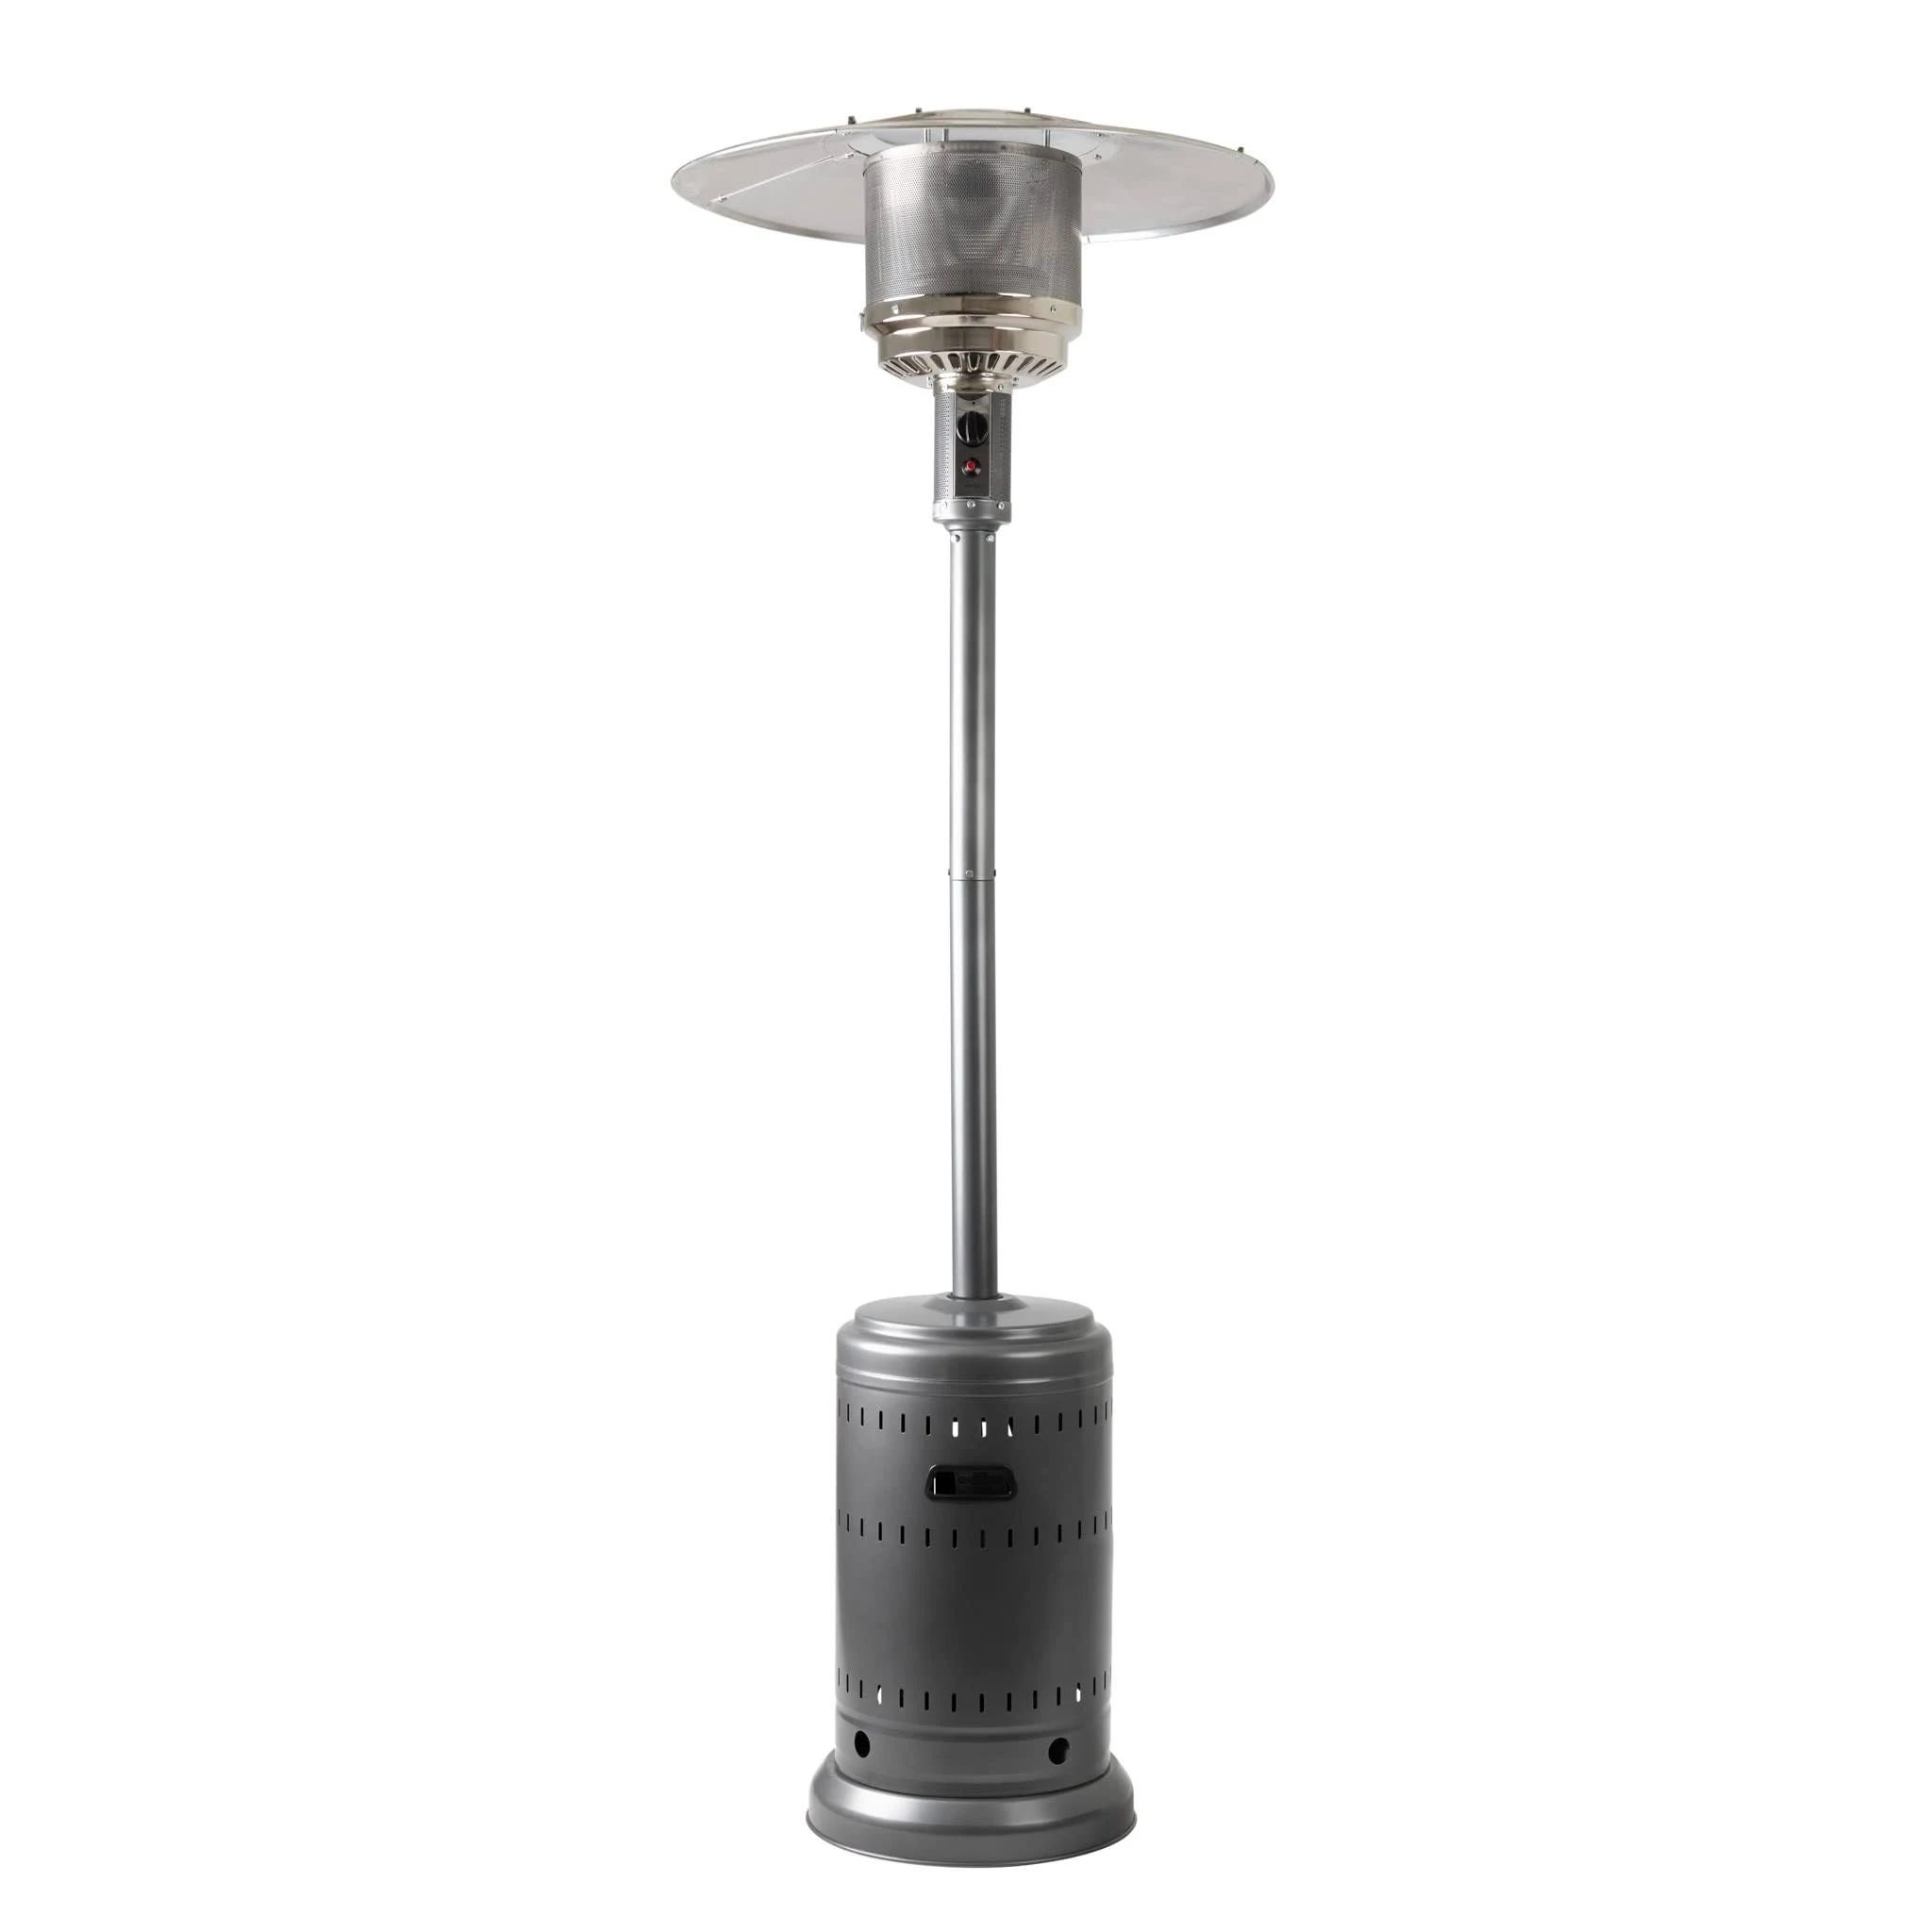 Outdoor Propane Patio Heater with Wheels | Image